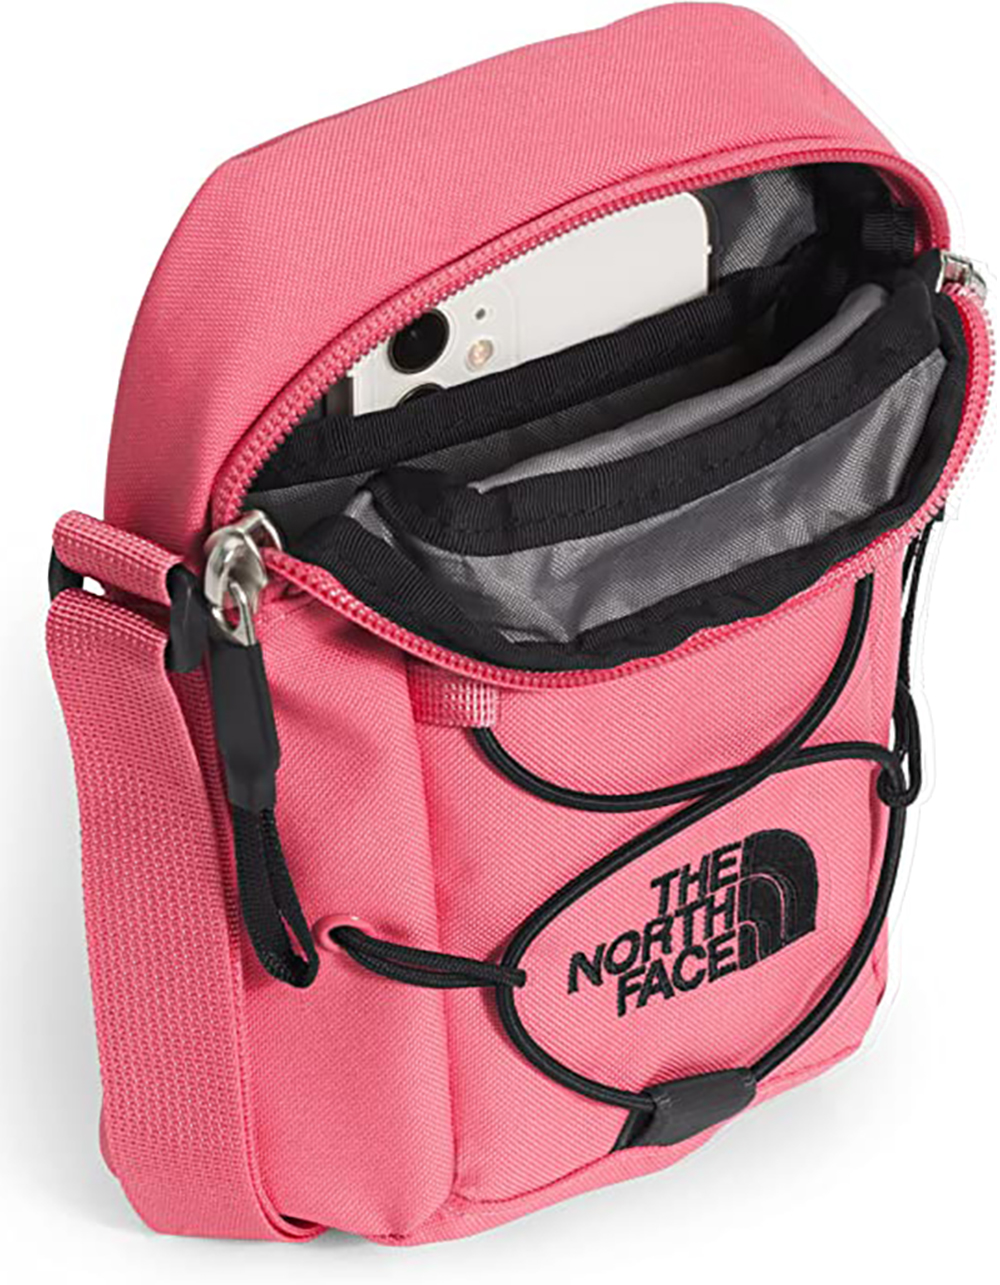 THE NORTH FACE Jester Crossbody Bag - PINK | Tillys